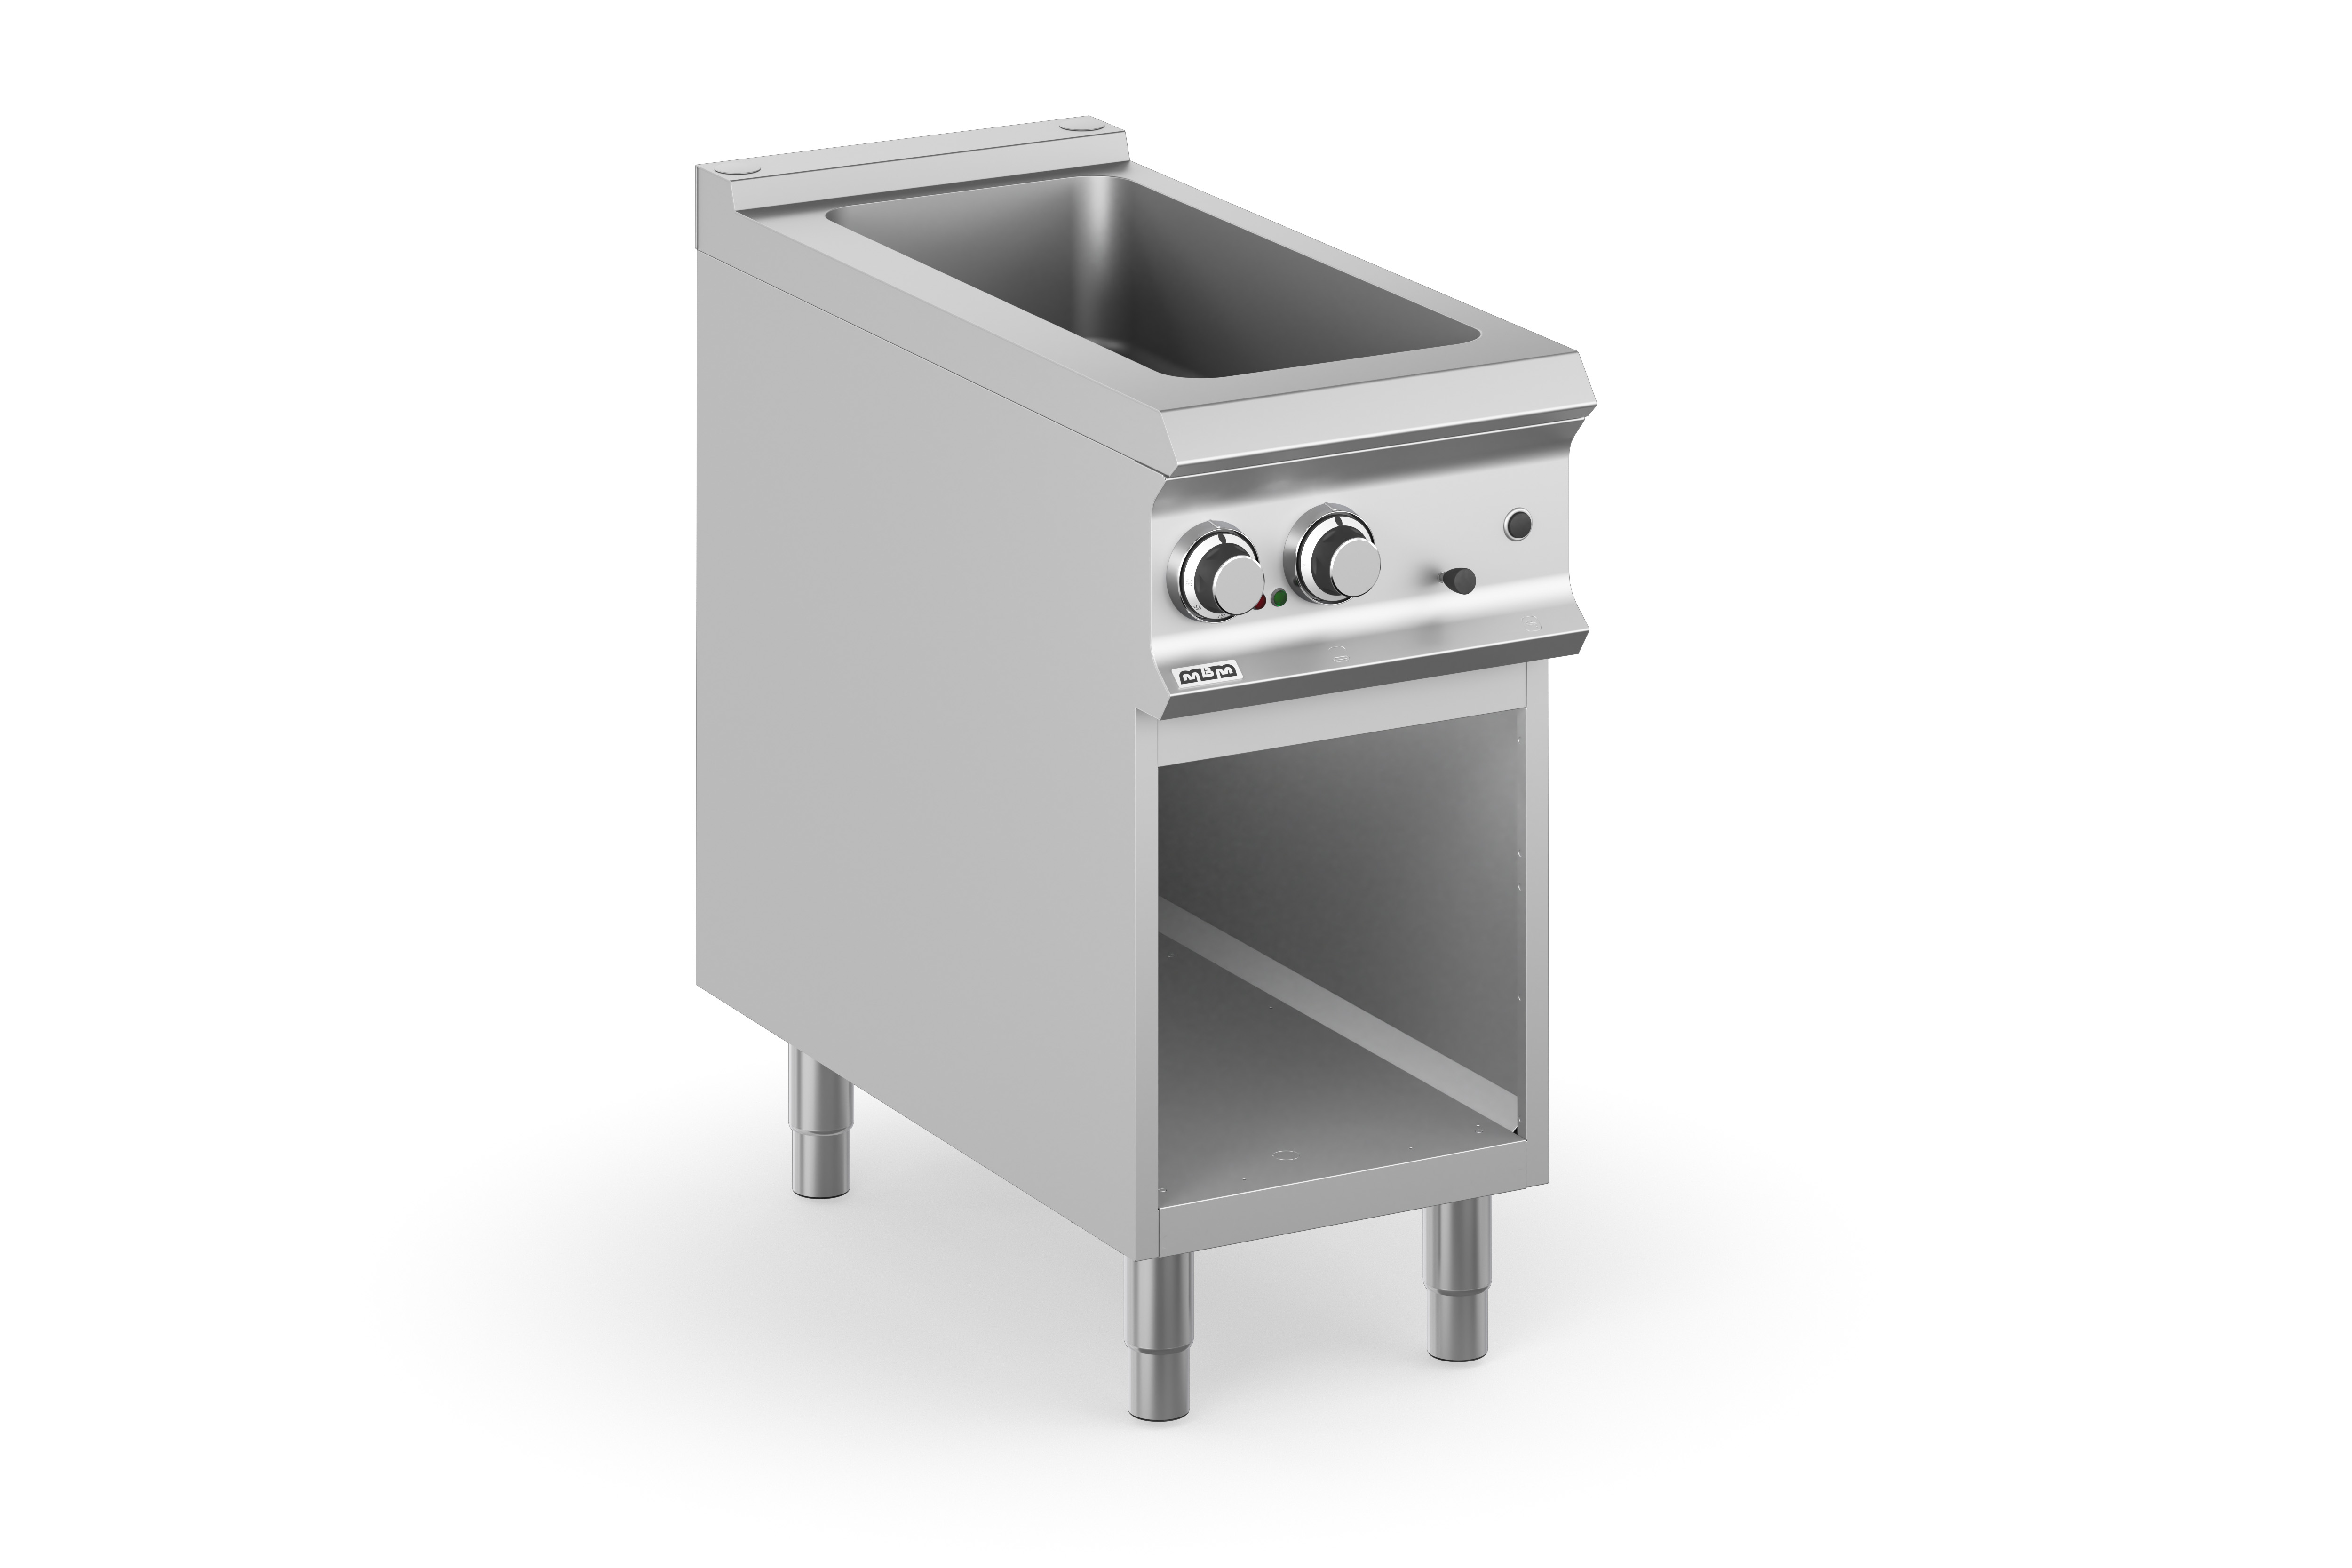 Domina Pro 900 BME94A Single Bowl GN 4/3 Freestanding Electric Bain Marie